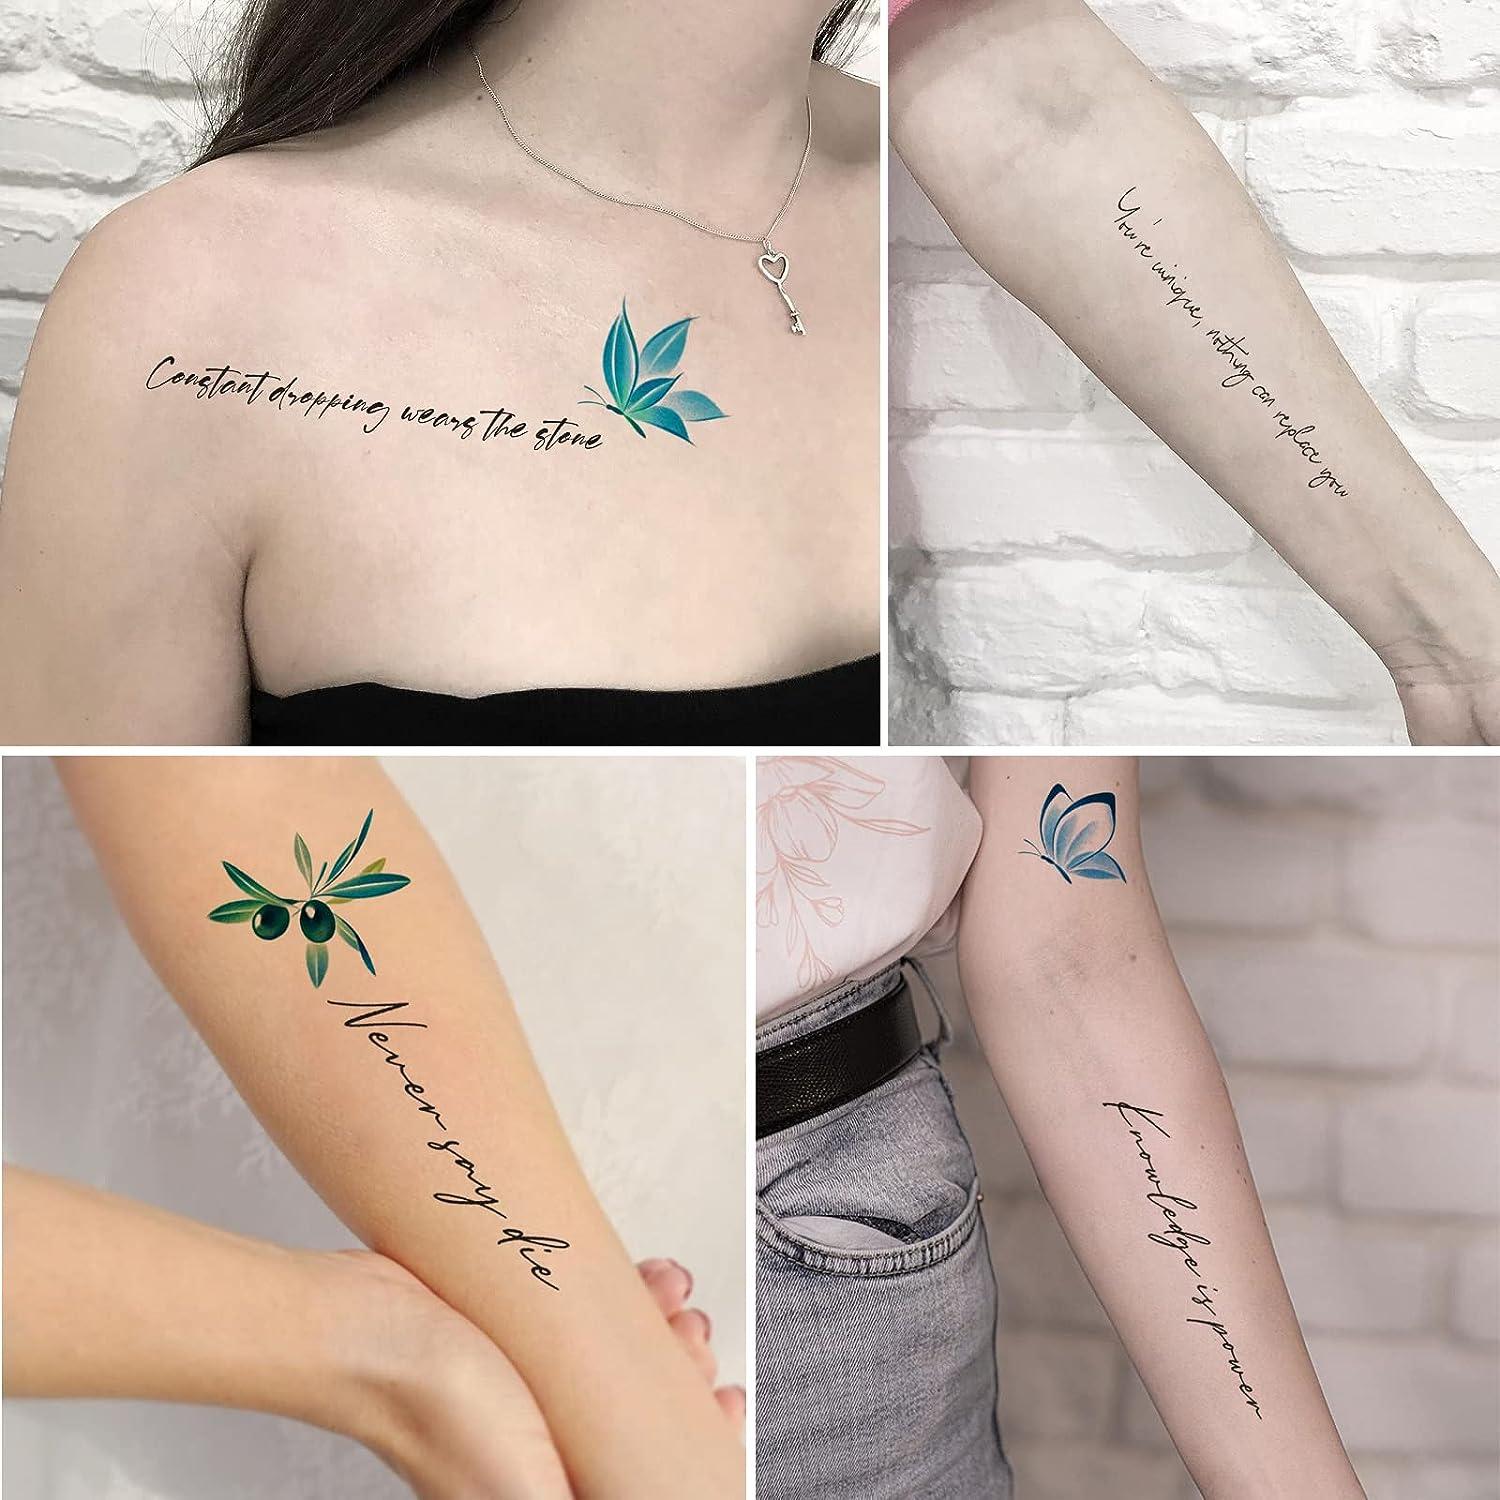 Can someone tell me their experience with religious tattoos, such as the  one shown in the picture? I'm just curious if many people would be against  it or If I have to